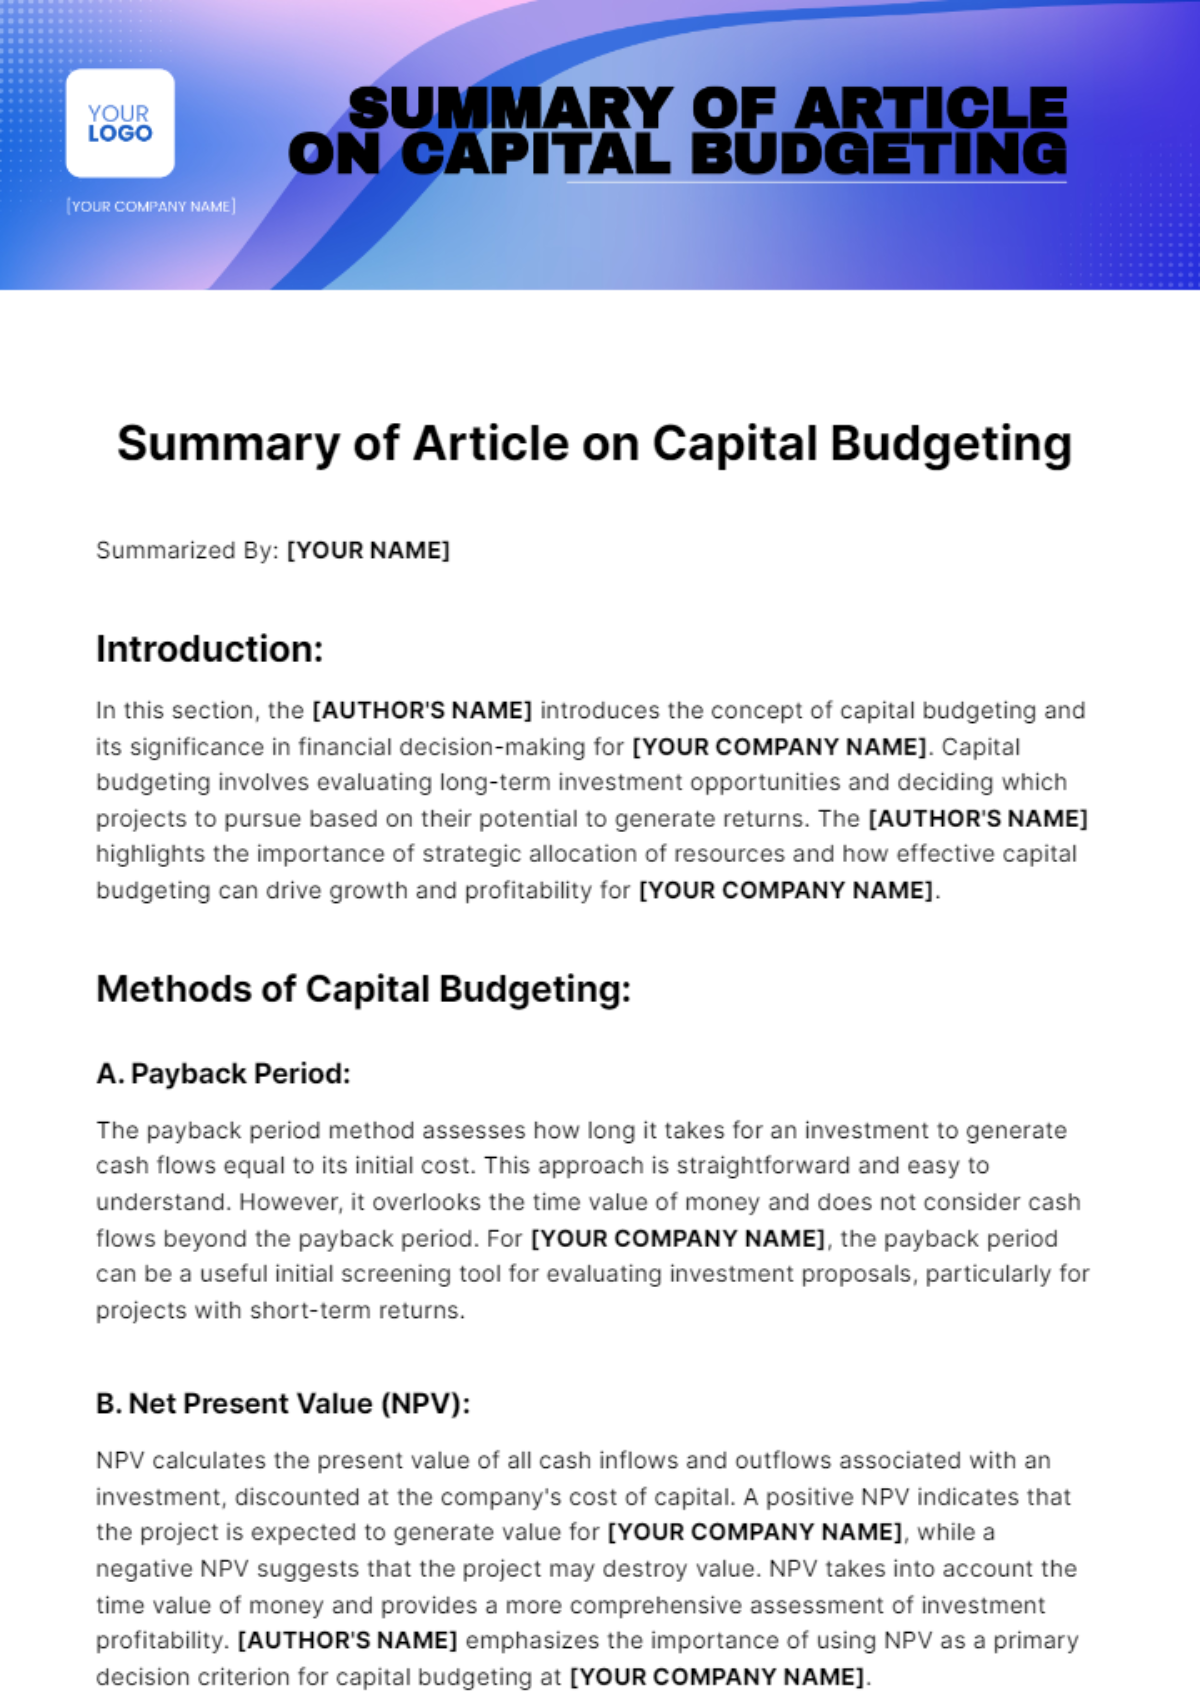 Summary of Article on Capital Budgeting Template